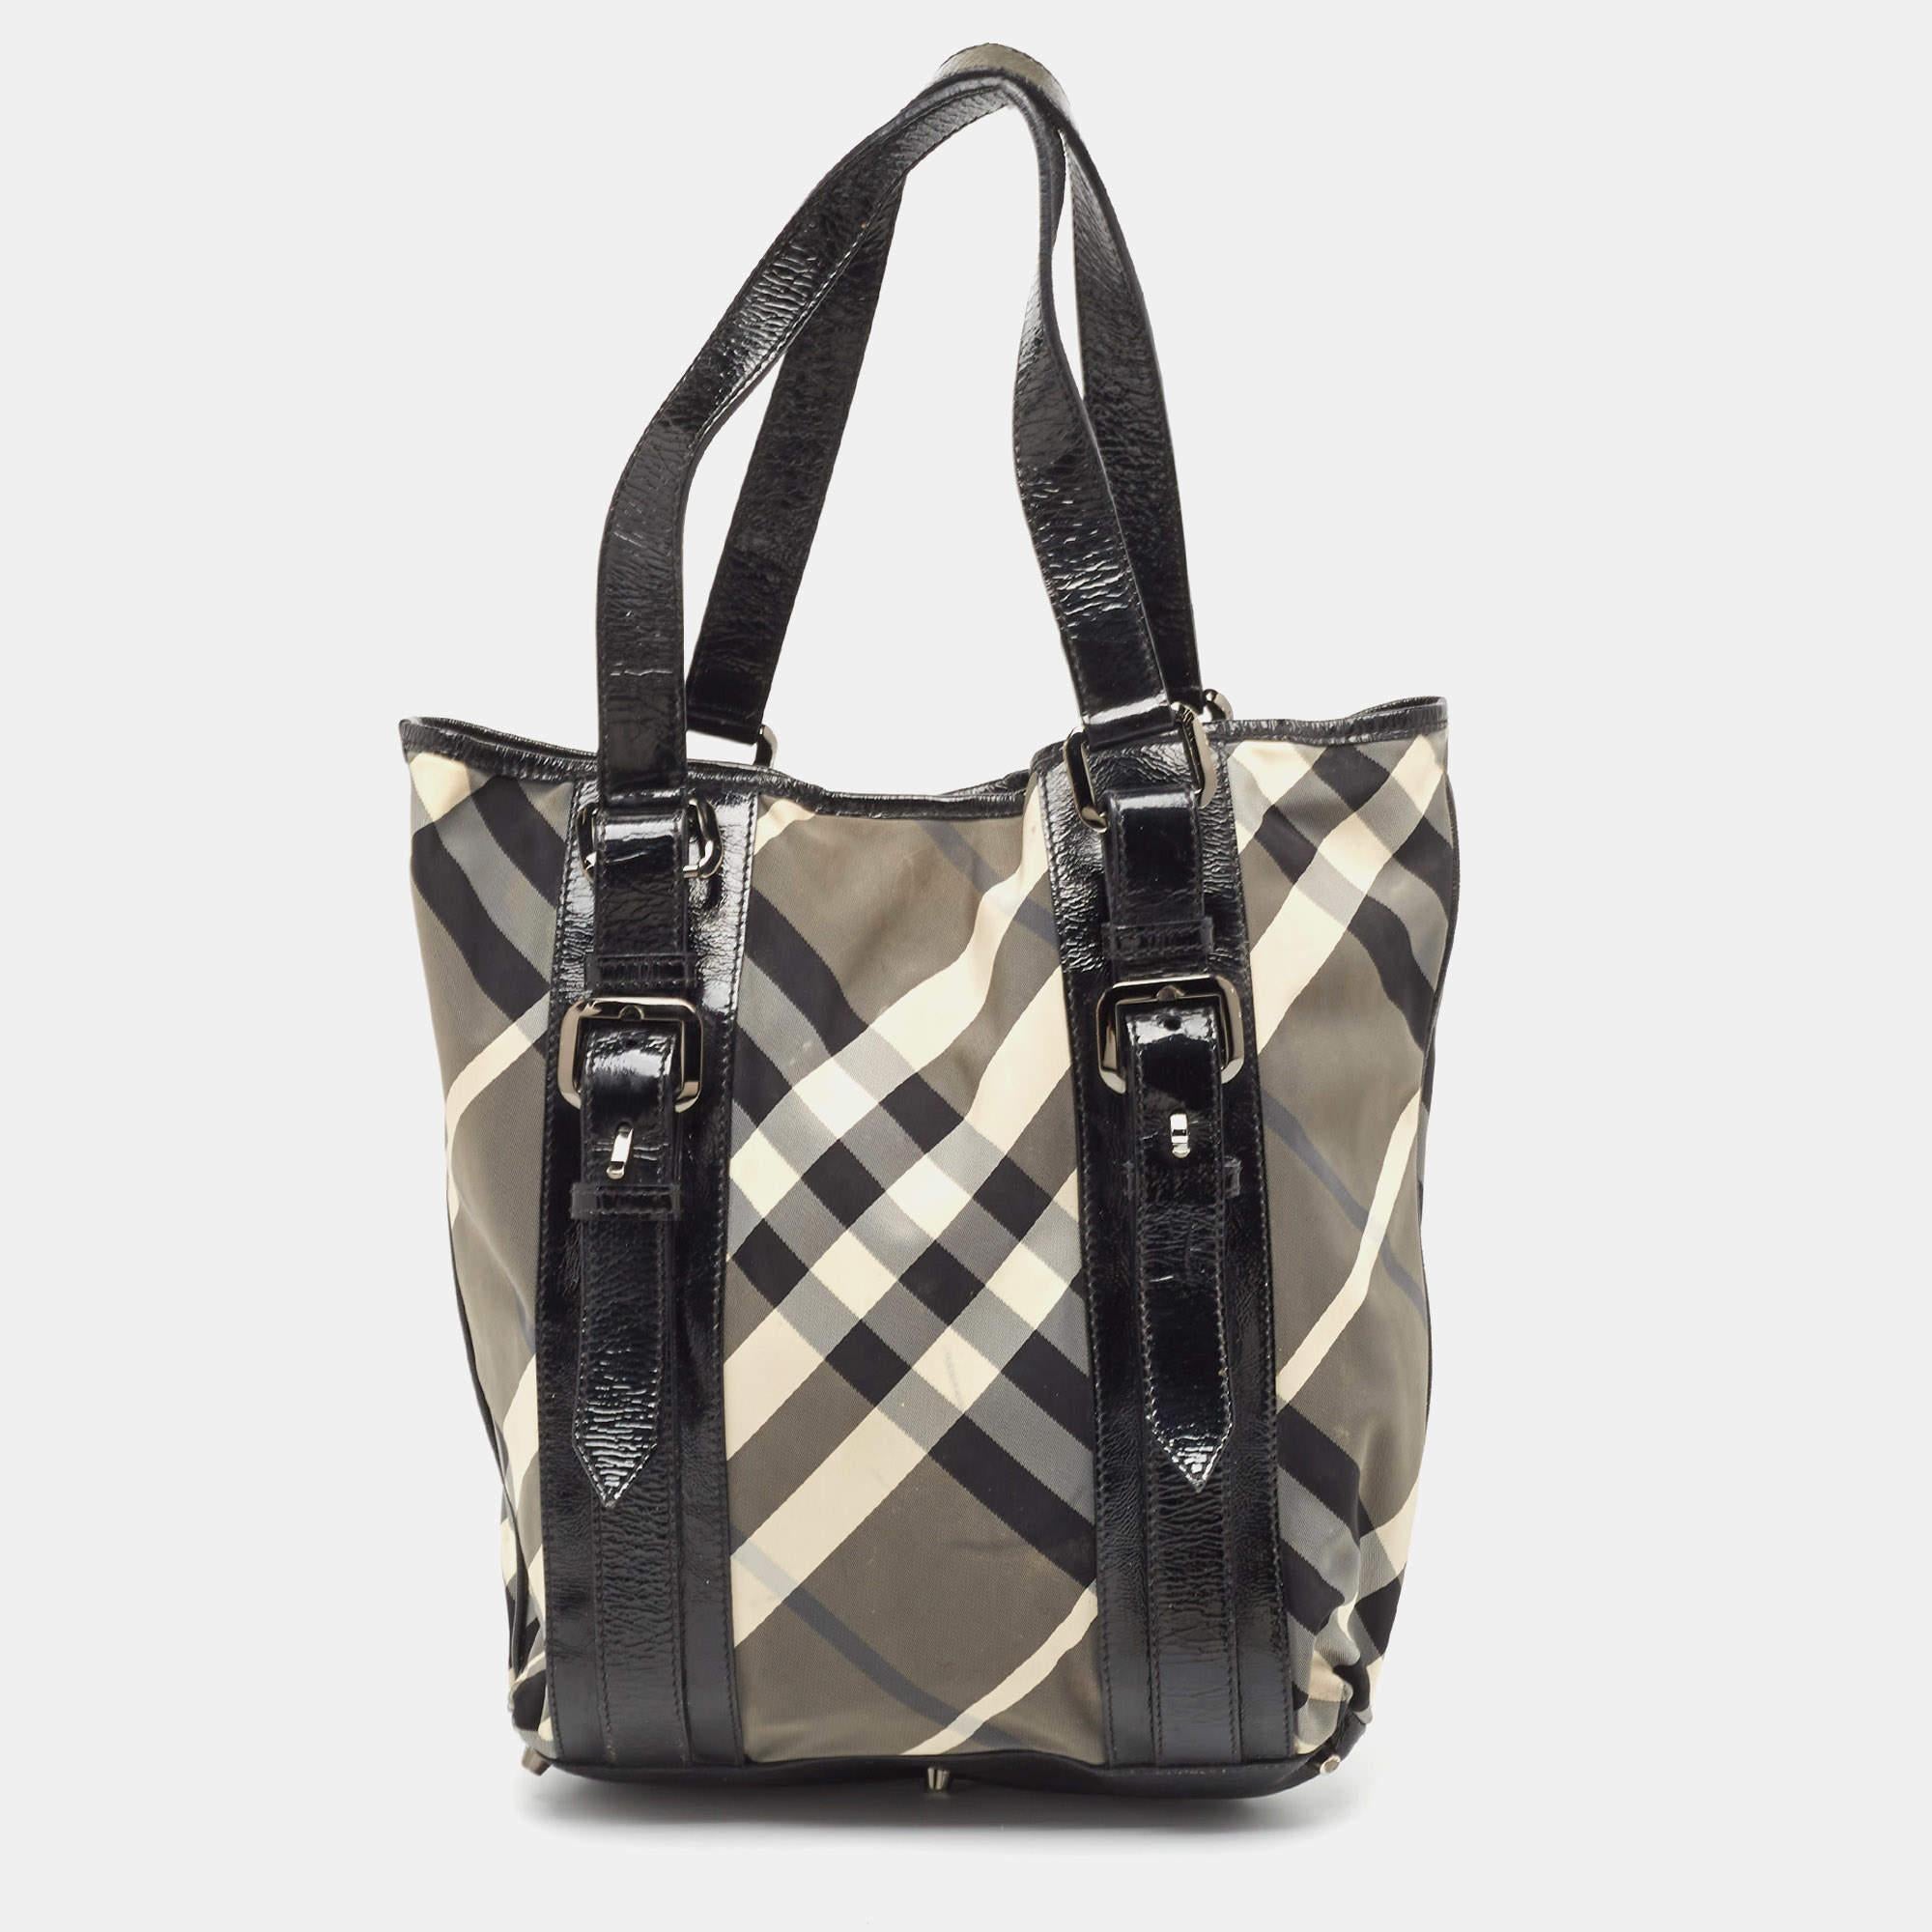 Complement a stylish look with this beautiful Burberry tote. It has a Beat Check nylon & patent leather exterior and a spacious nylon interior. This bag is completed with buckles and flat handles.

